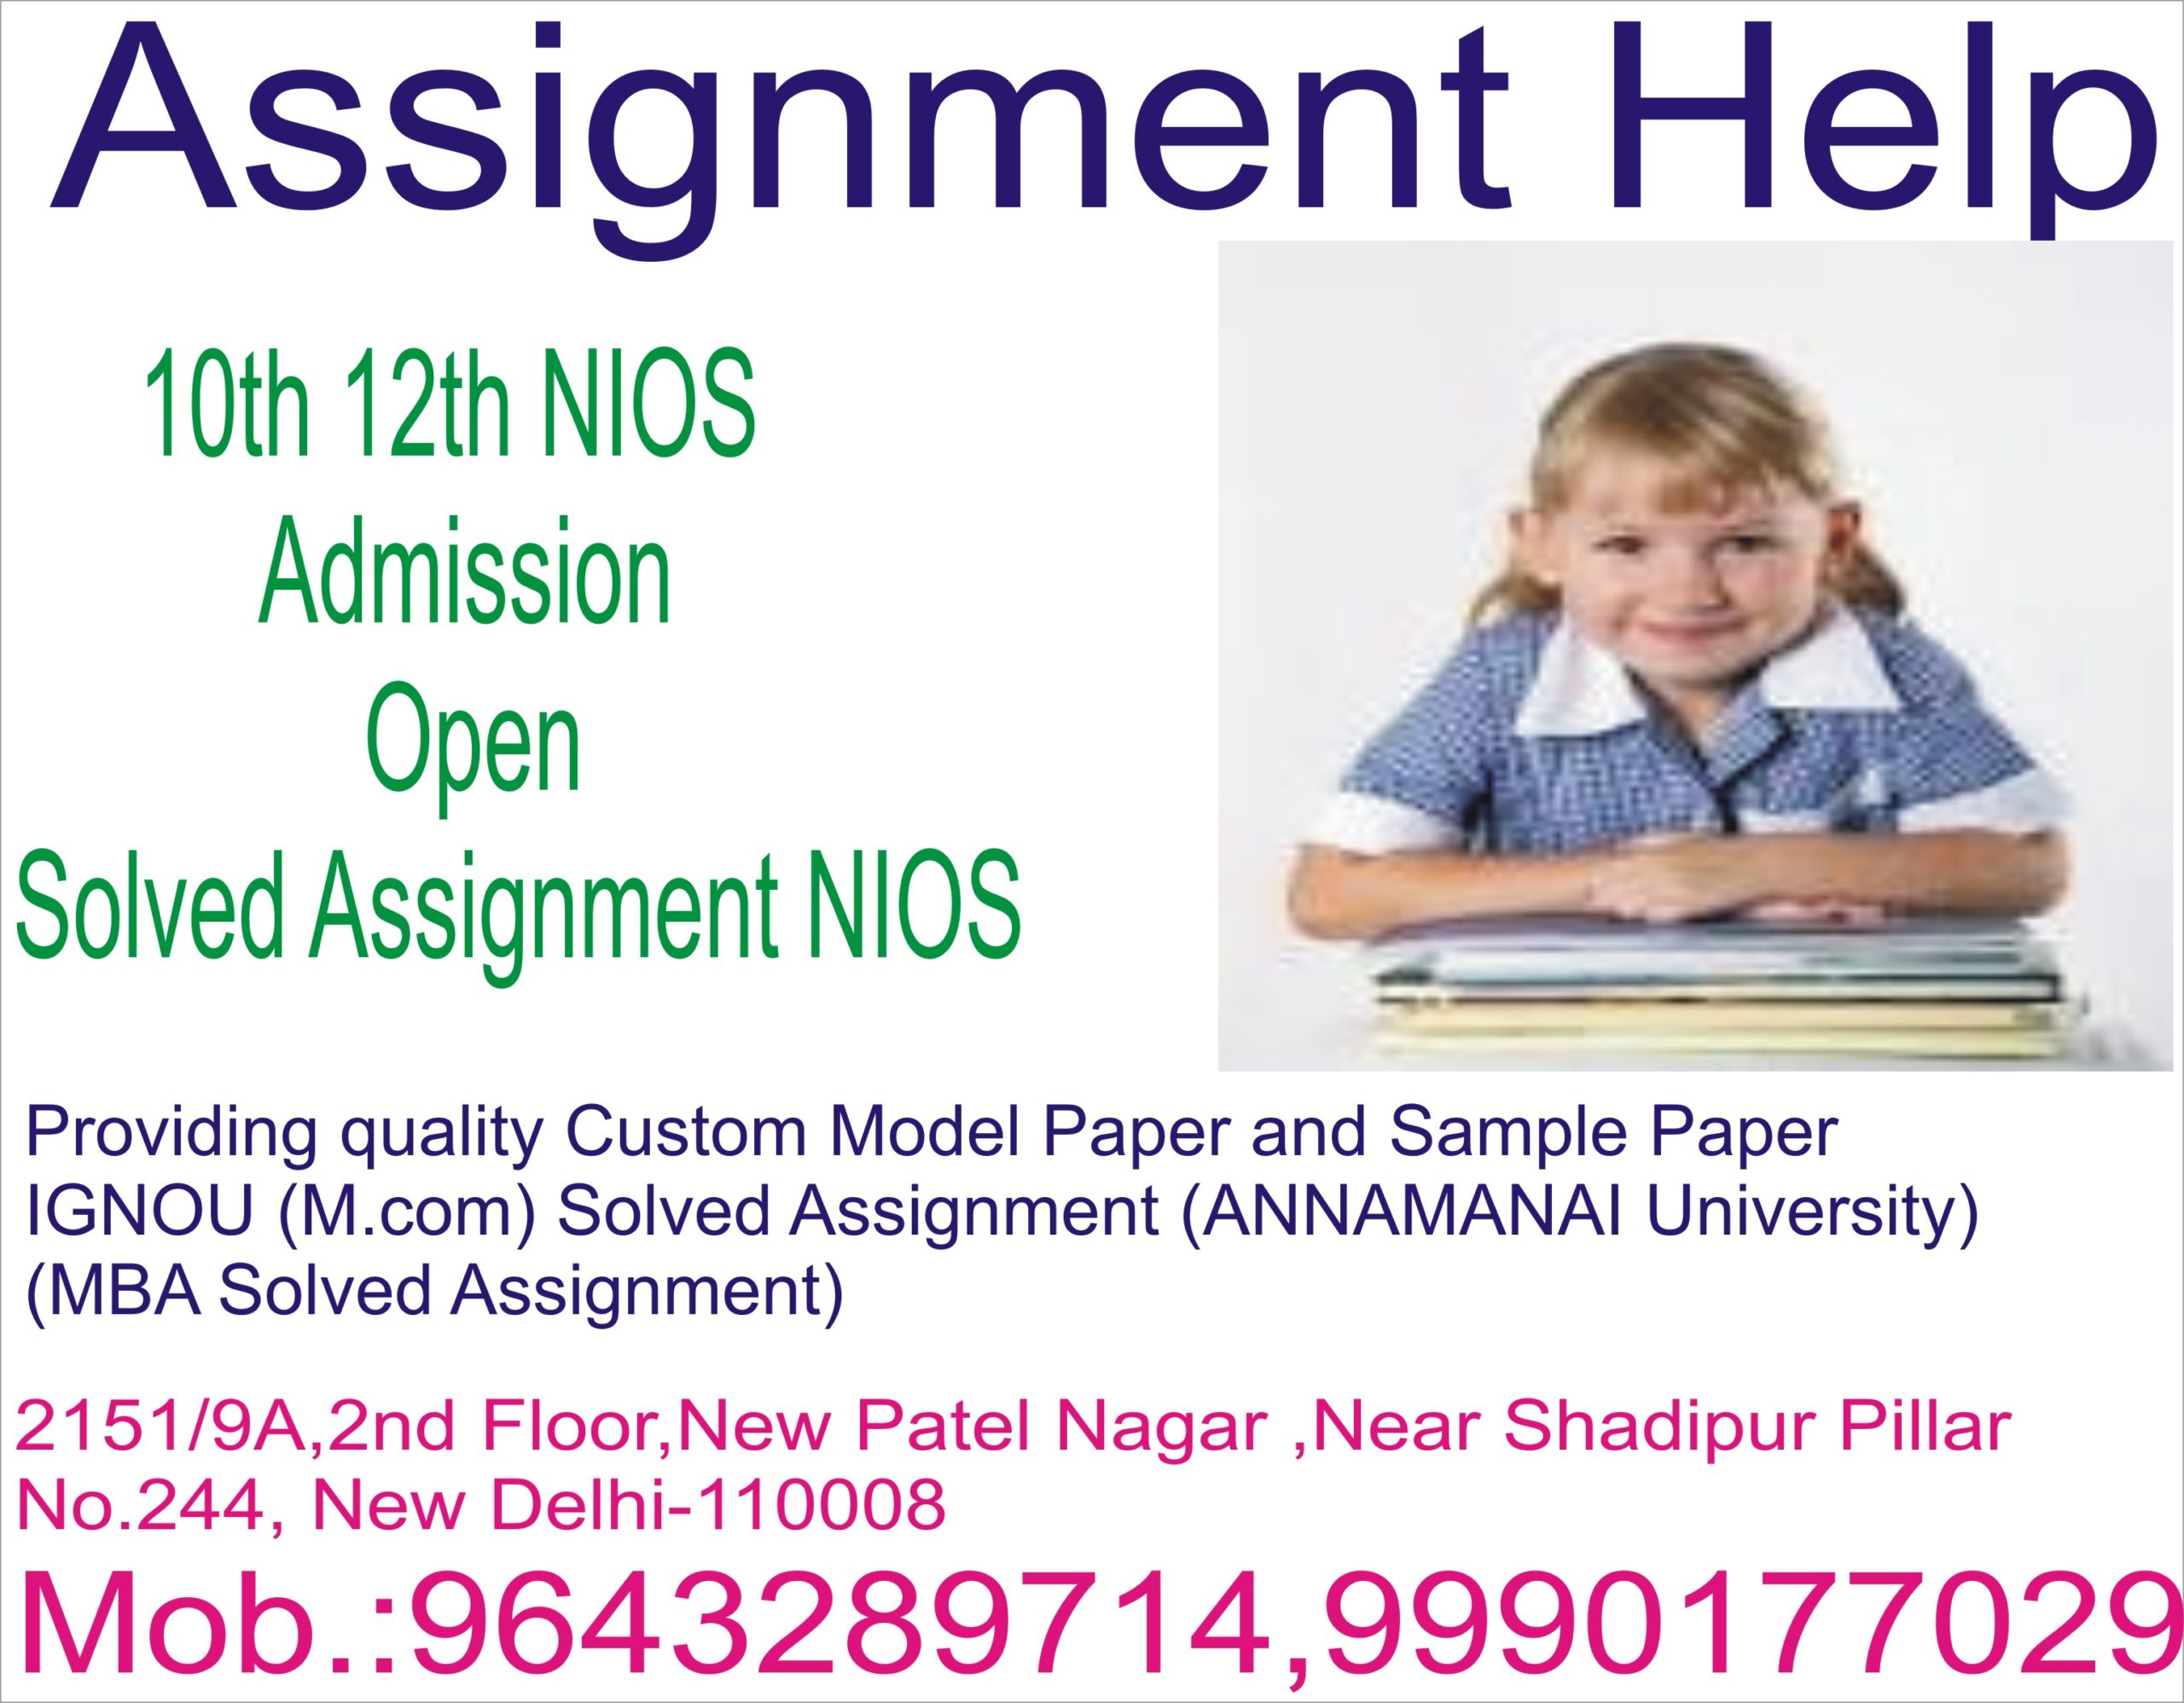 How do I get confirmation of my TMA? Where we can find solved assignment (TMA)@9643289714